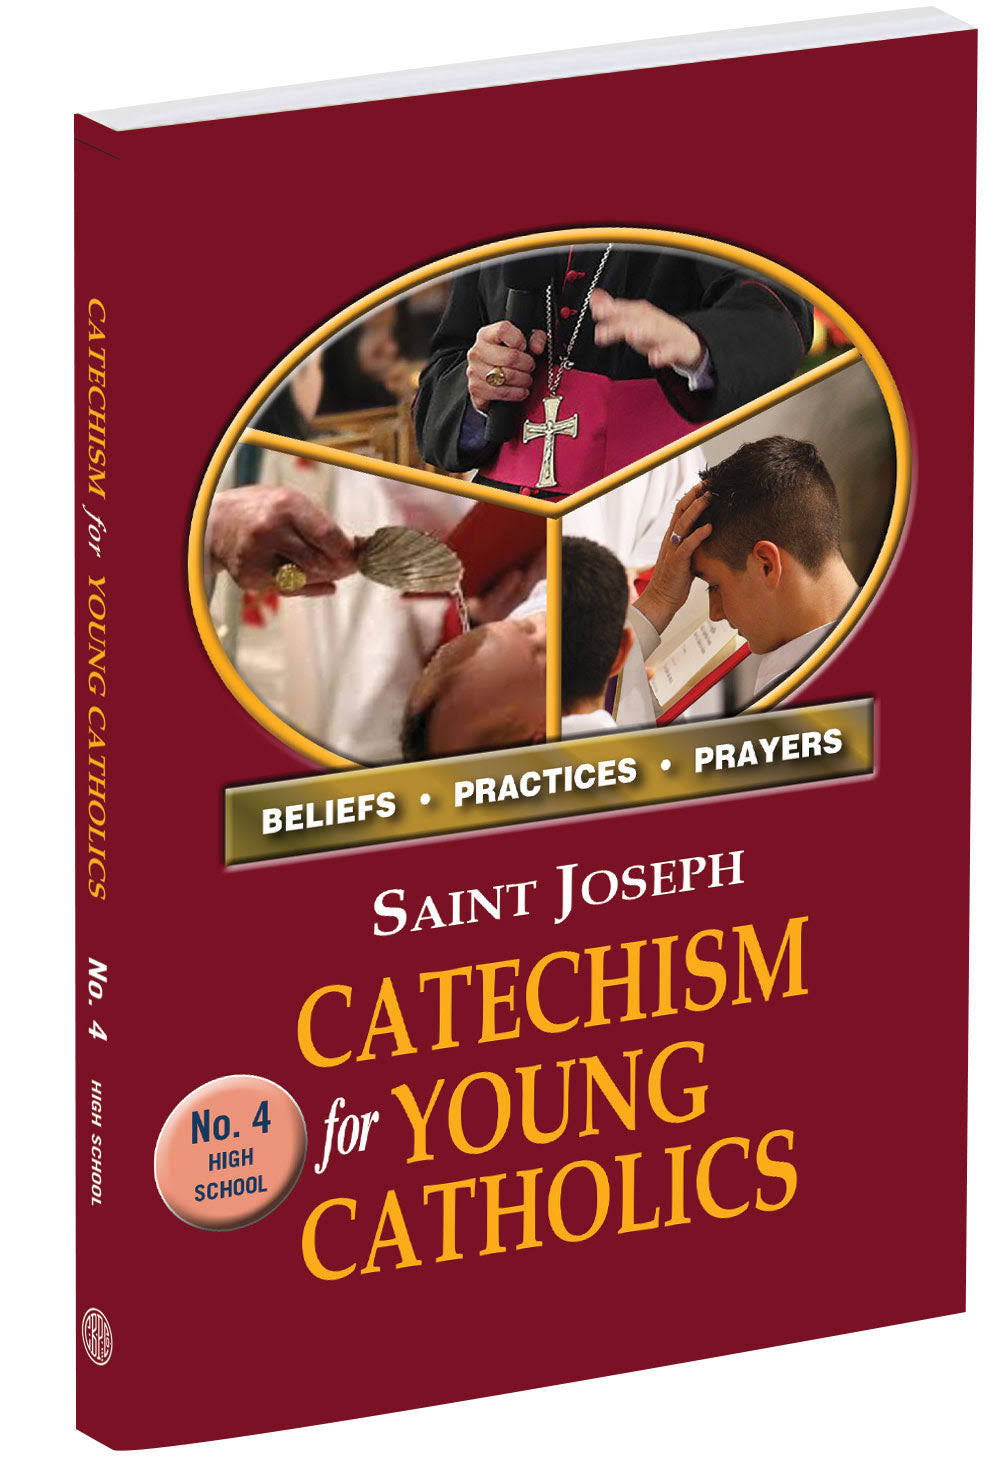 St. Joseph Catechism for Young Catholics: No. 4 [Book]